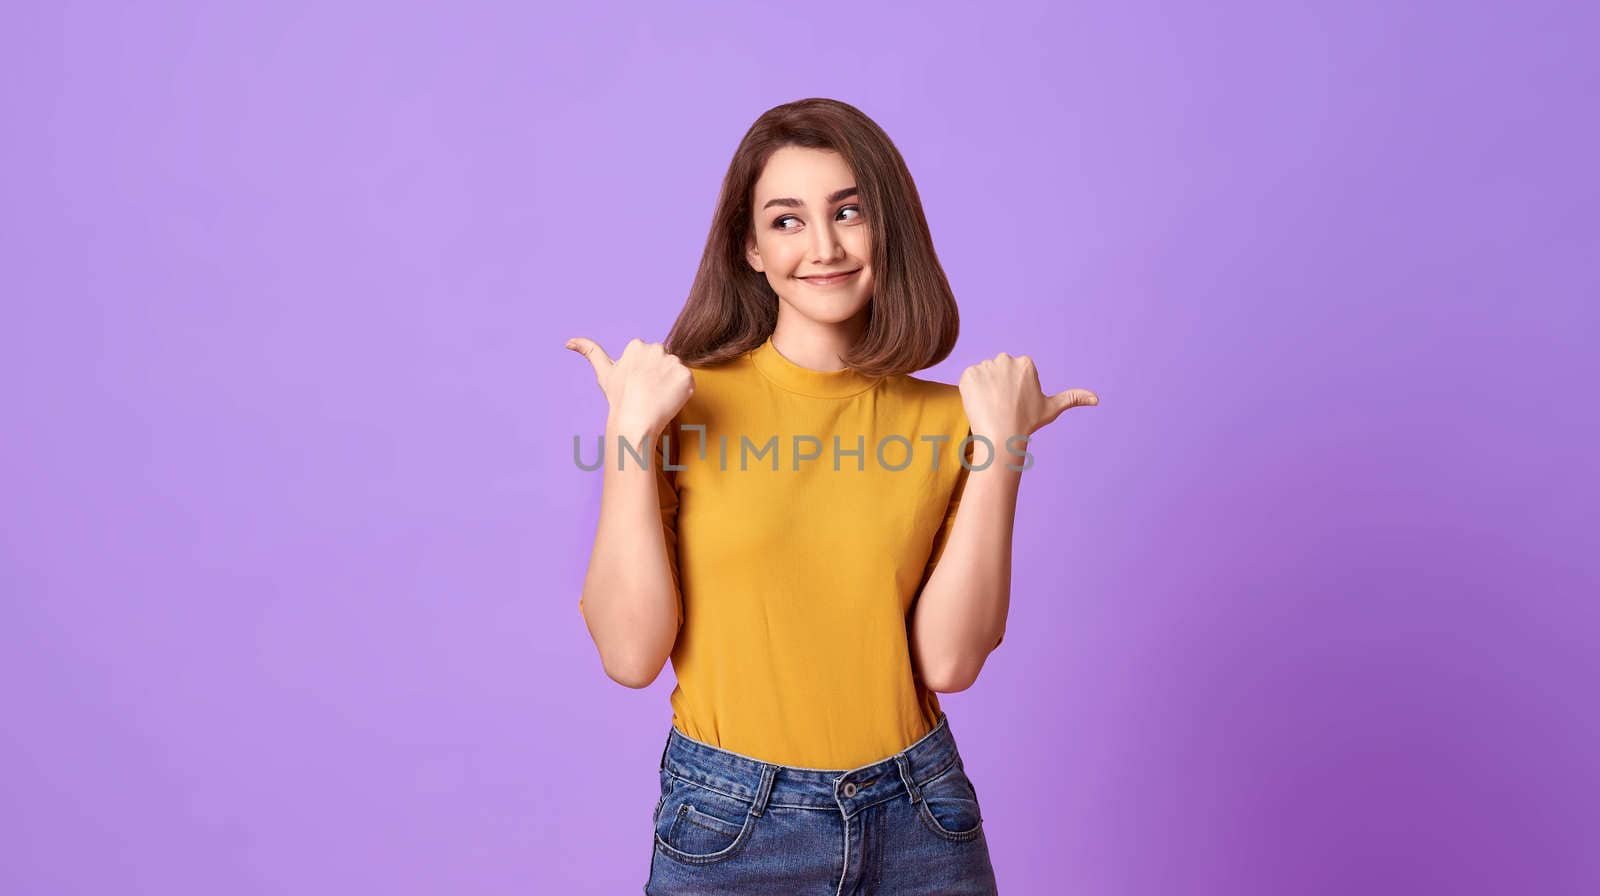 Happy young woman her pointing hand over purple banner background with copy space.